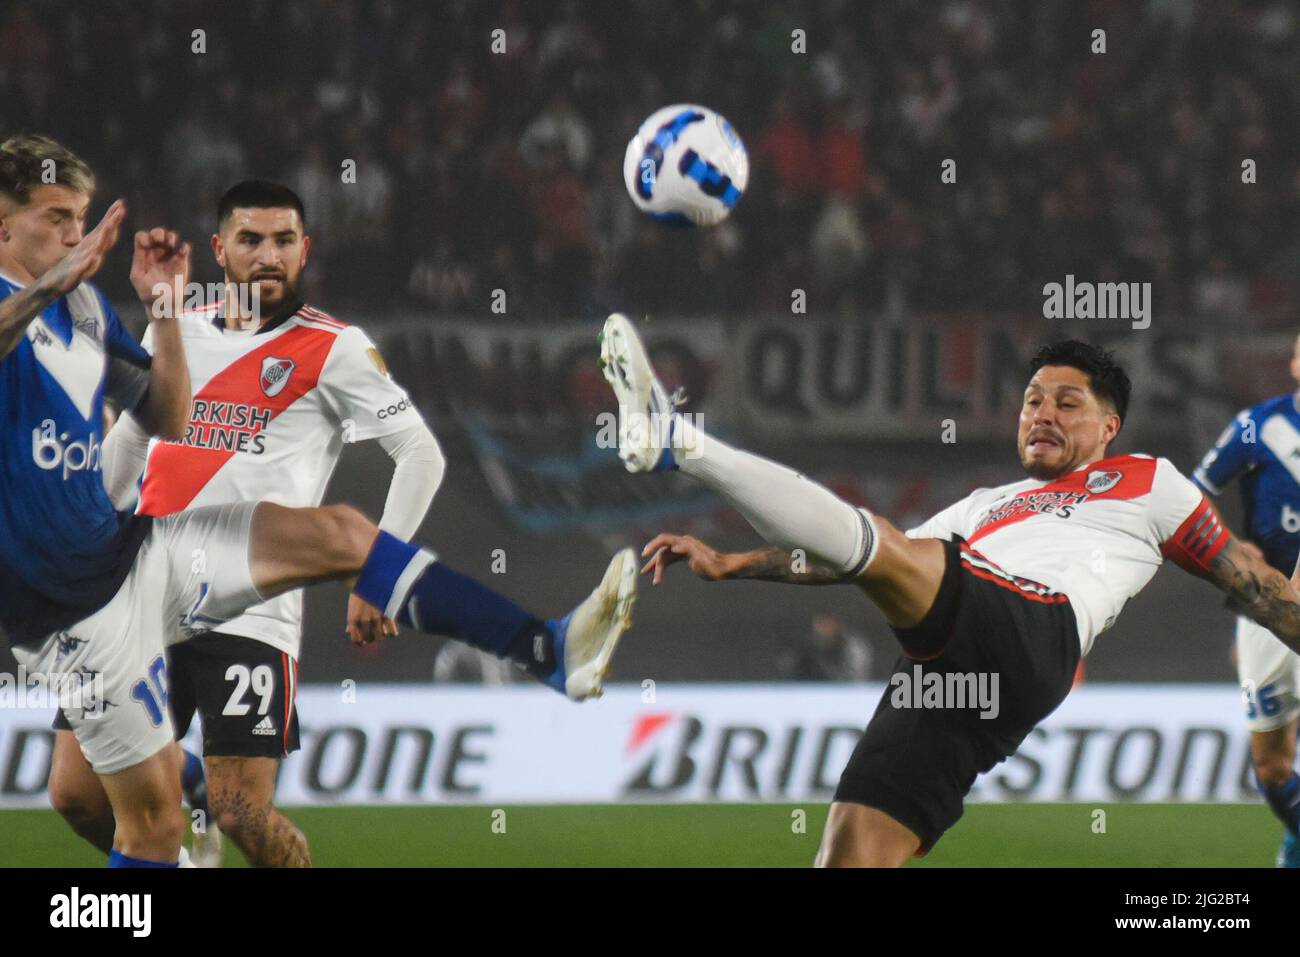 Buenos Aires, Argentina. 06th July, 2022. Match between River Plate and Velez Sarsfield valid for the second leg of the round of 16 of the Copa Libertadores de América 2022 played at Estadio Monumental, Buenos Aires, Argentina on July 6, 2022. Credit: Gabriel Sotelo/FotoArena/Alamy Live News Stock Photo